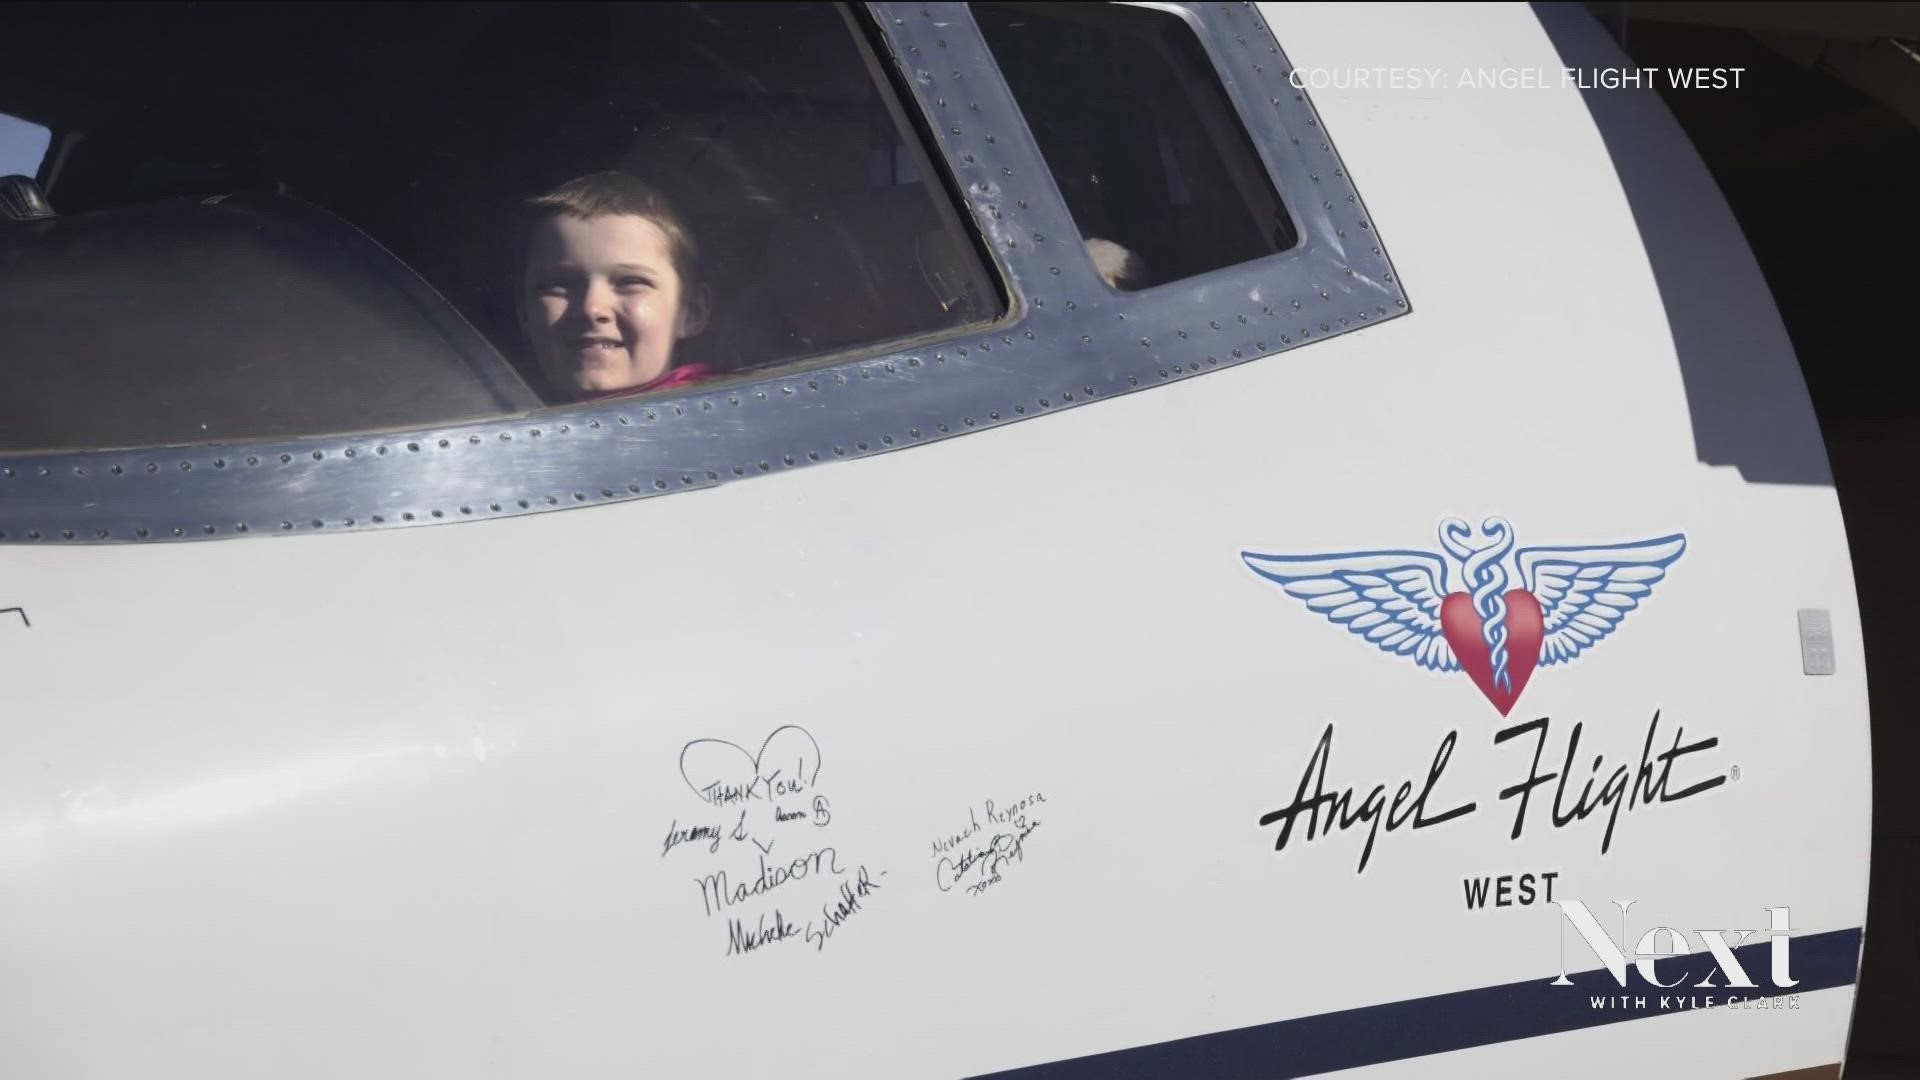 Angel flight West works with International Jet Aviation to transport patients to medical care for free.